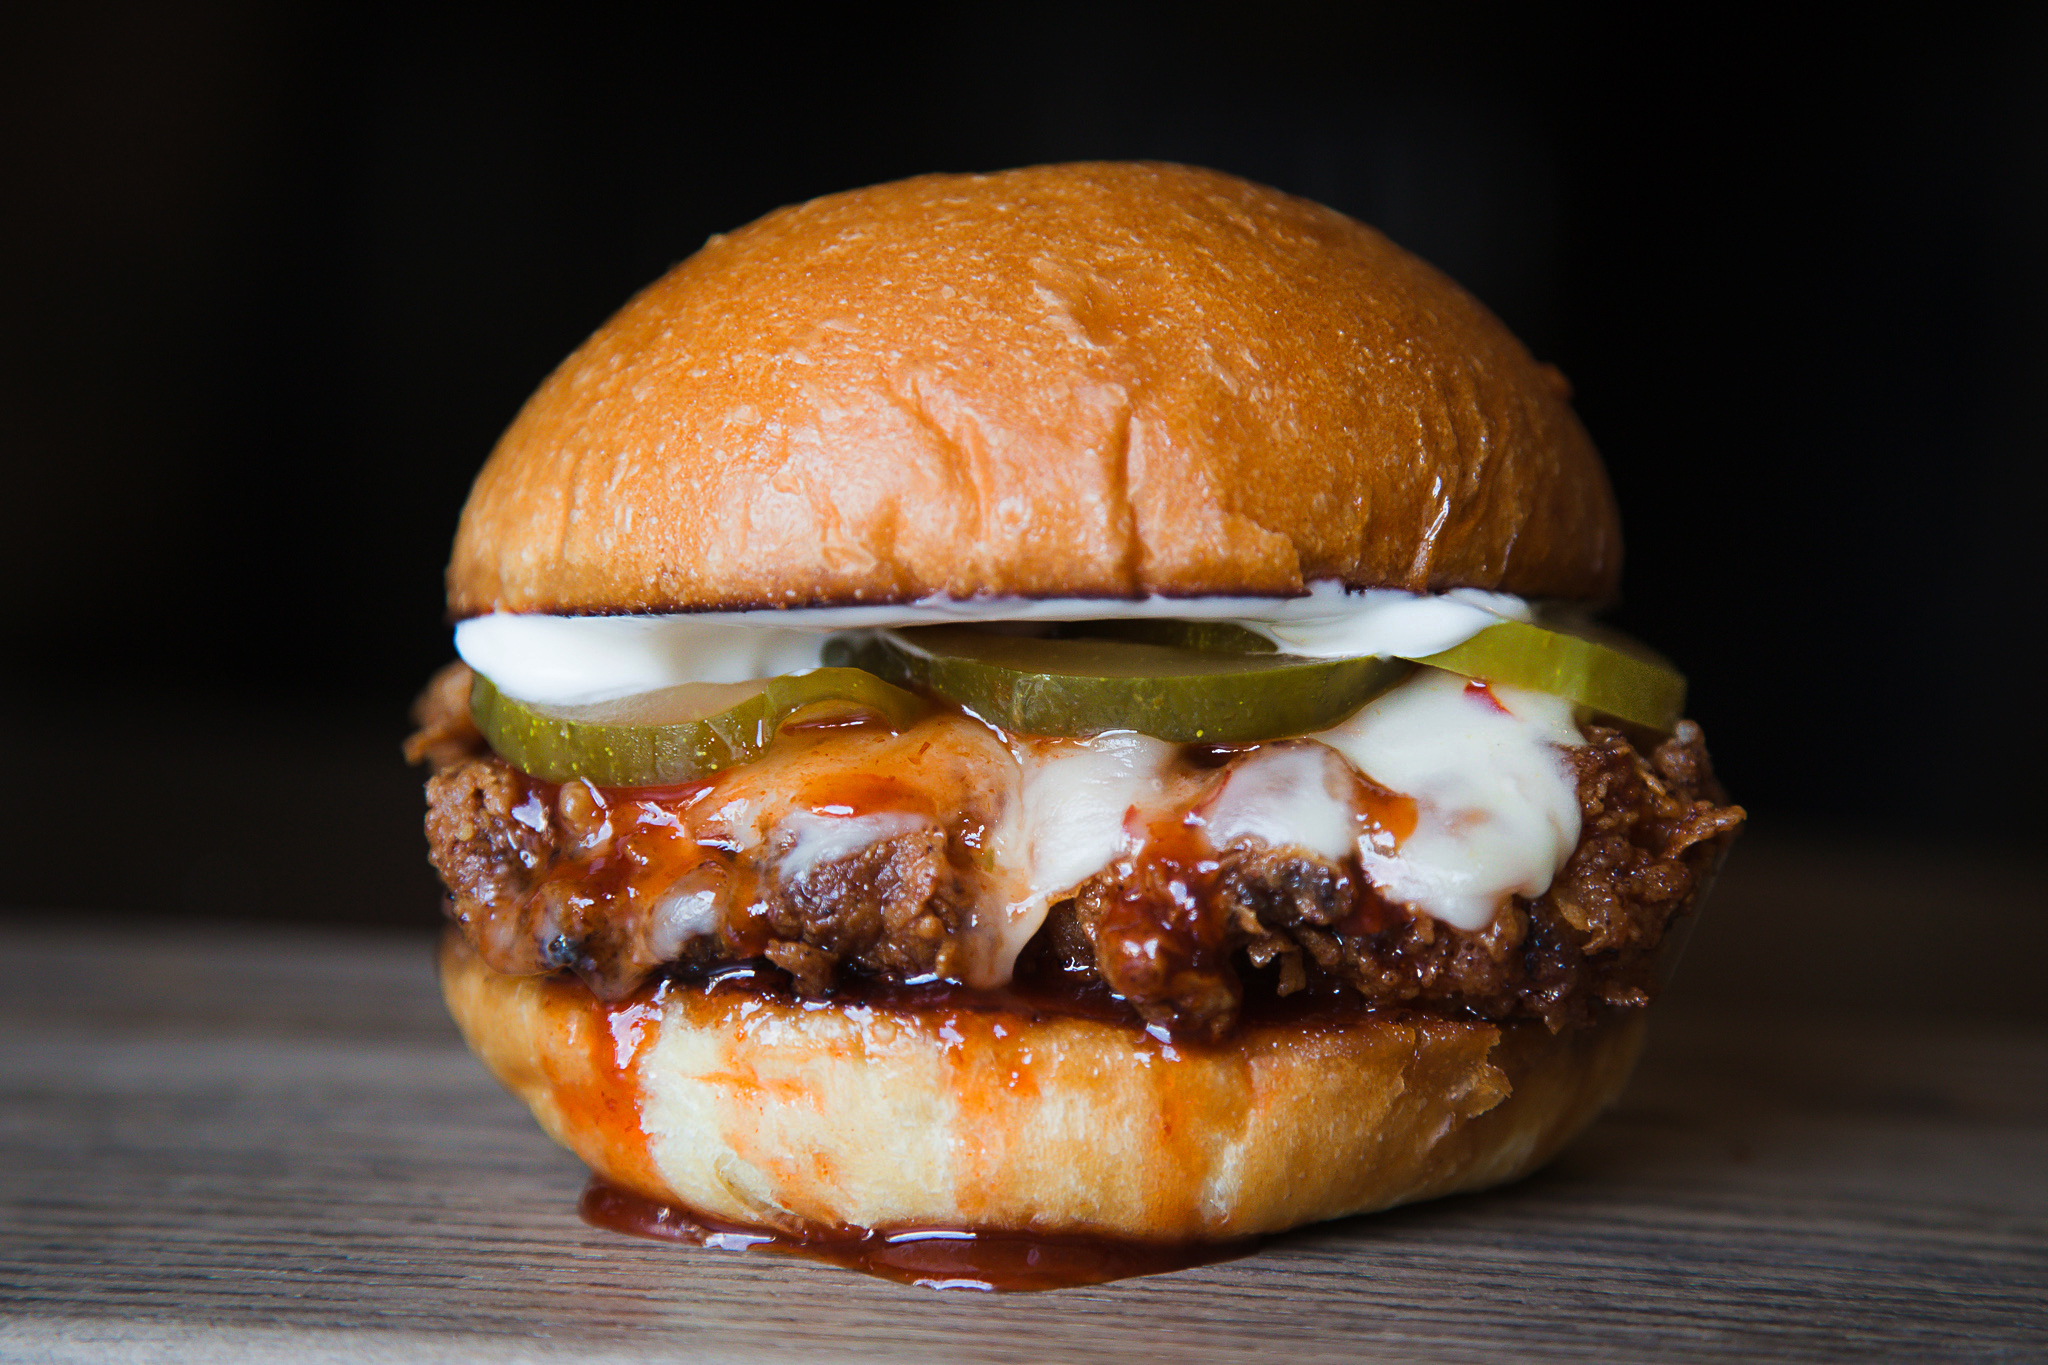 Award-winning burger concept The Cut set to open its first standalone location in Irvine